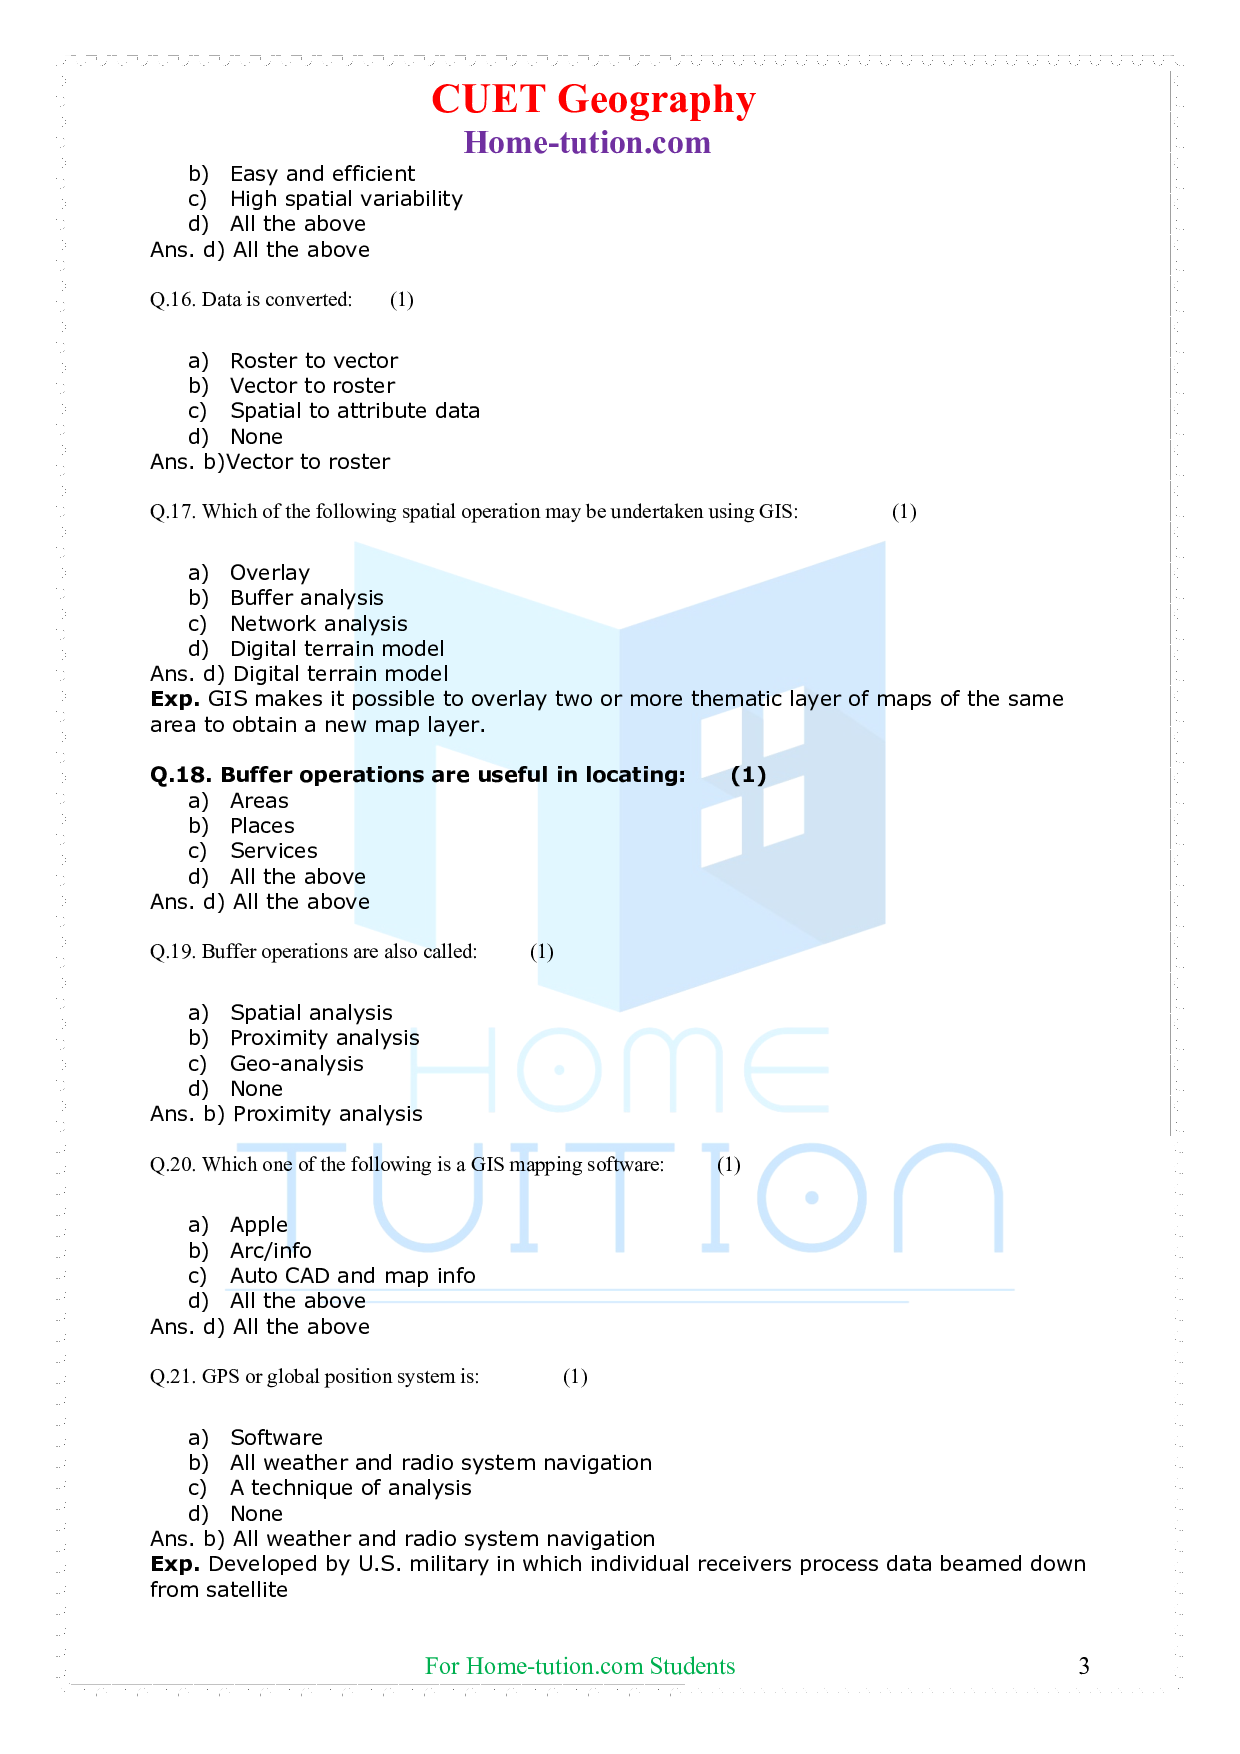 MCQ Questions For CUET Geography Chapter 6 Spatial Information Technology